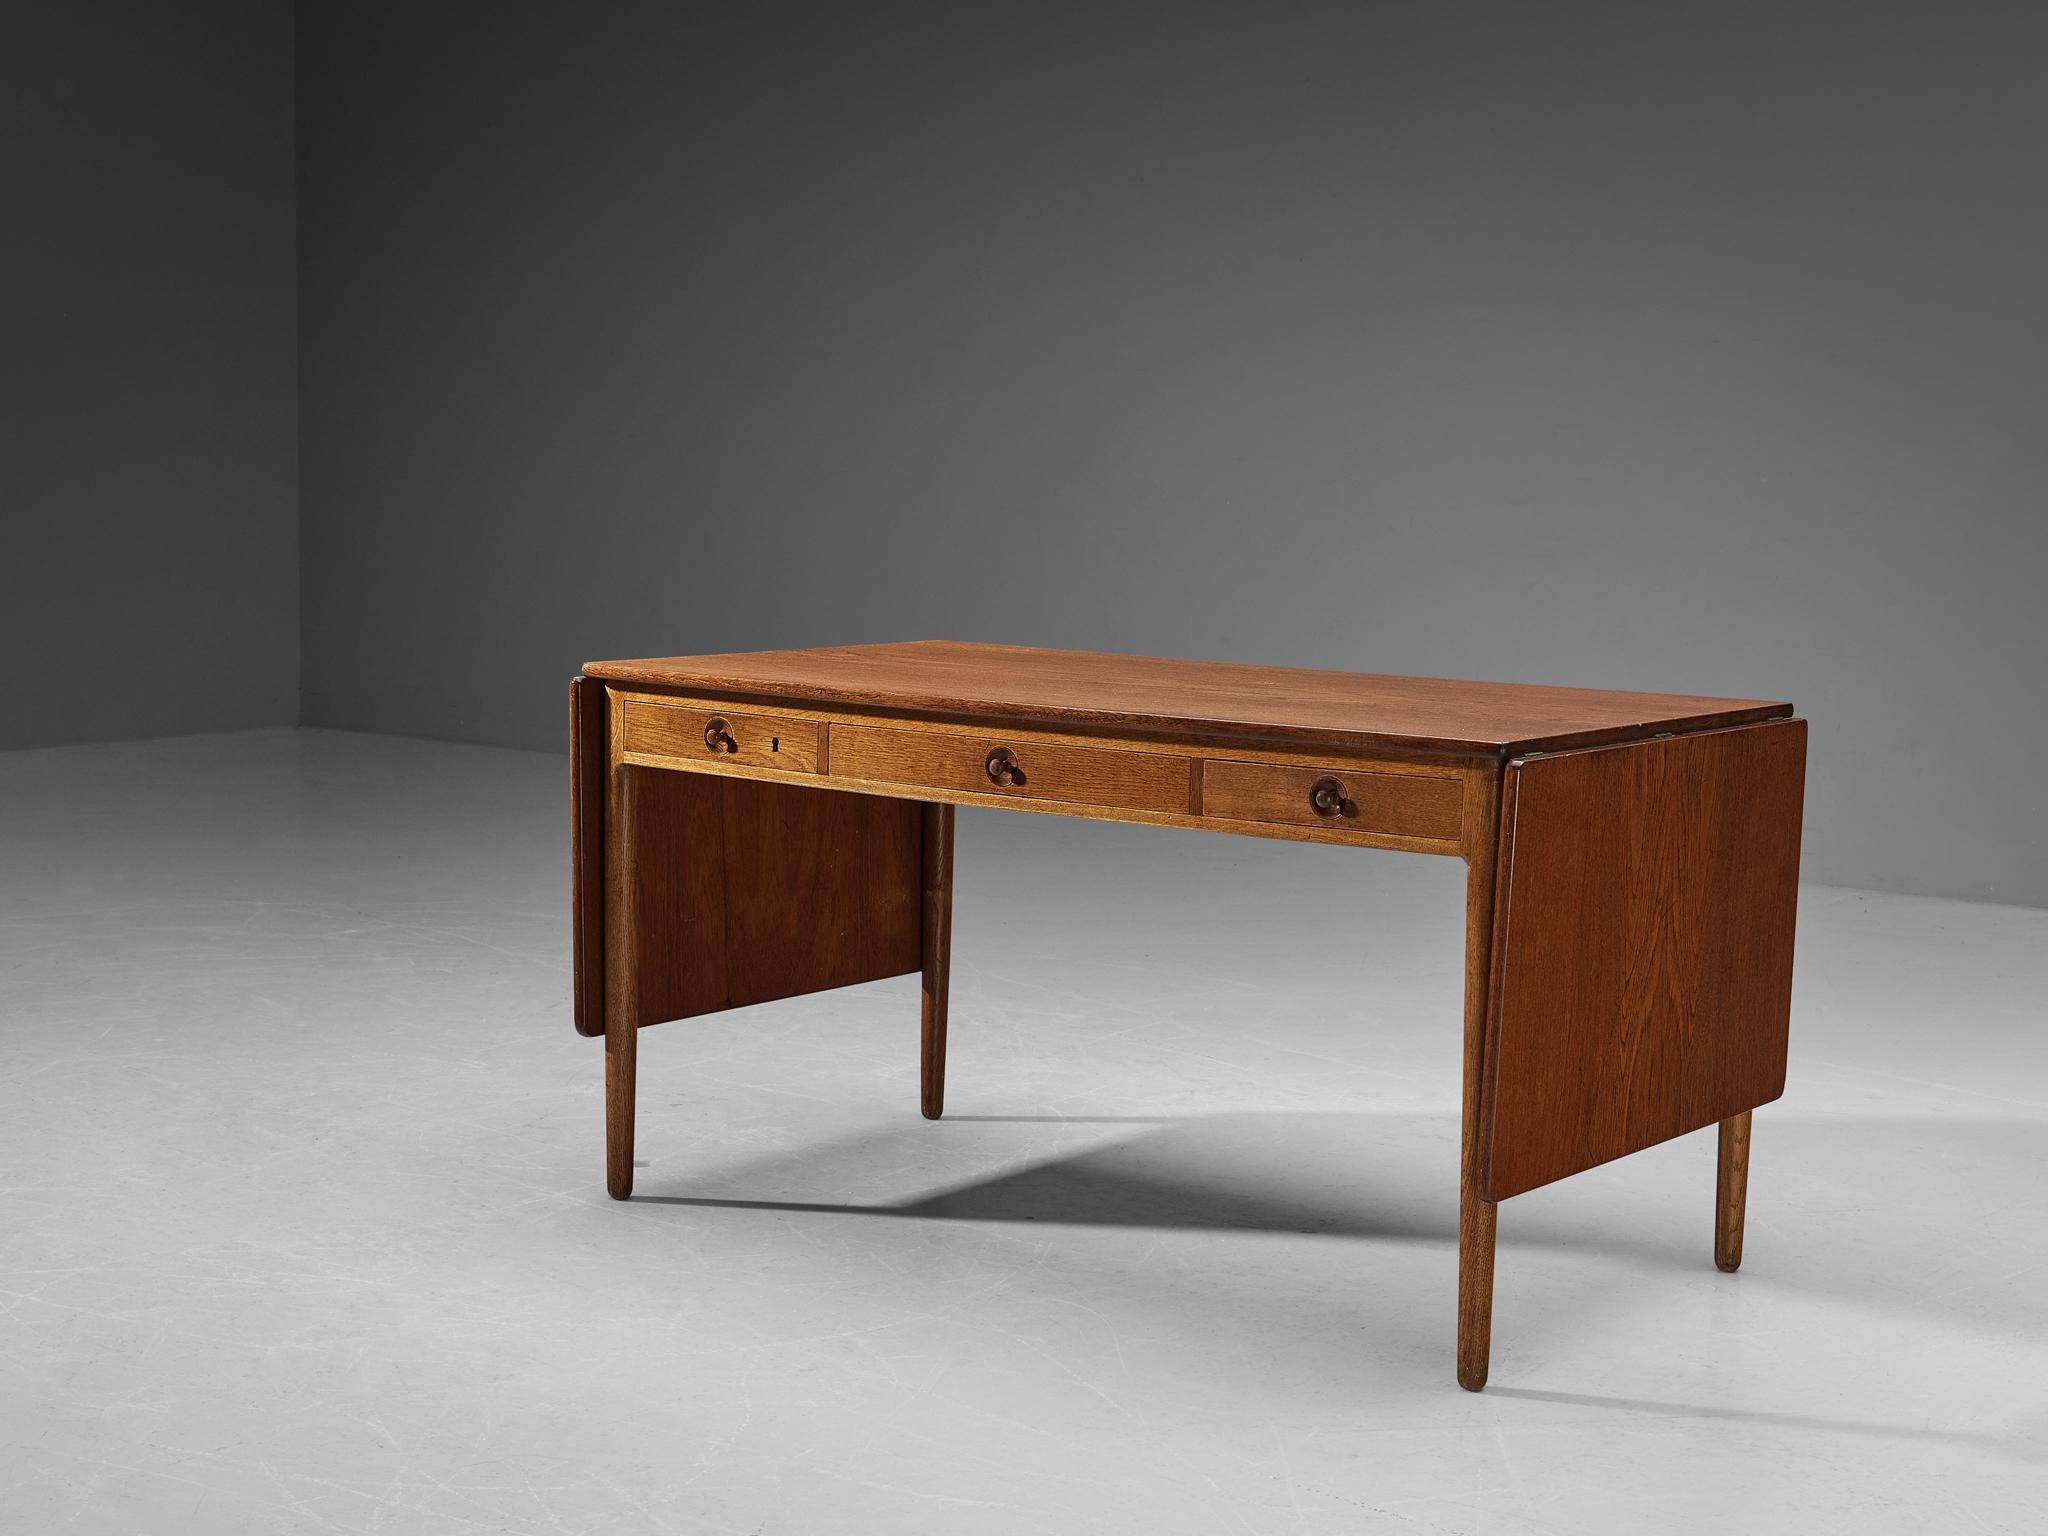 Hans J. Wegner for Andreas Tuck, desk, model 'AT305', solid oak, teak veneer, Denmark 1955

Hans Wegner created a coherent table which is achieved by the implementation of purely geometric forms. The structure and arrangement of each individual